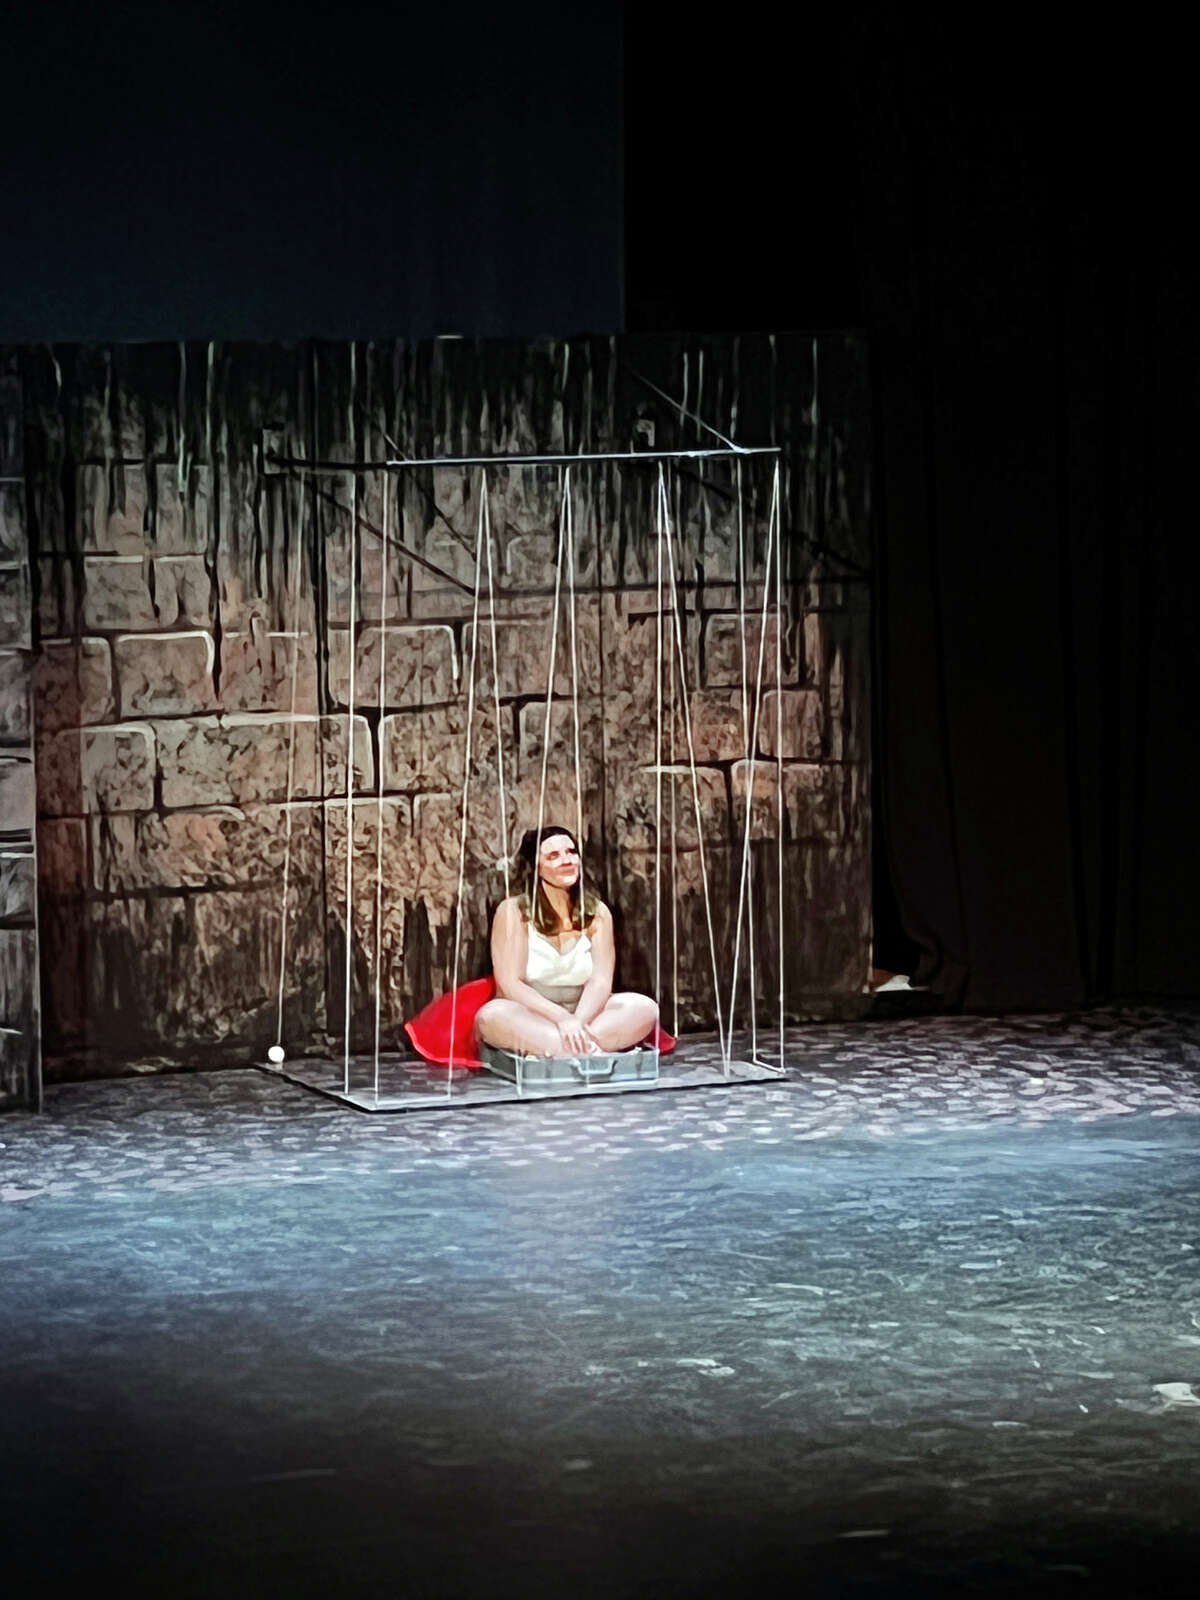 Illinois College senior Cassidy Harvey portrays the title character during rehearsals for IC TheatreWorks' production of "Eurydice." The play follows the story of young lovers Eurydice and Orpheus, the latter of whom ventures into the Underworld to reclaim his bride-to-be after she dies on their wedding day.